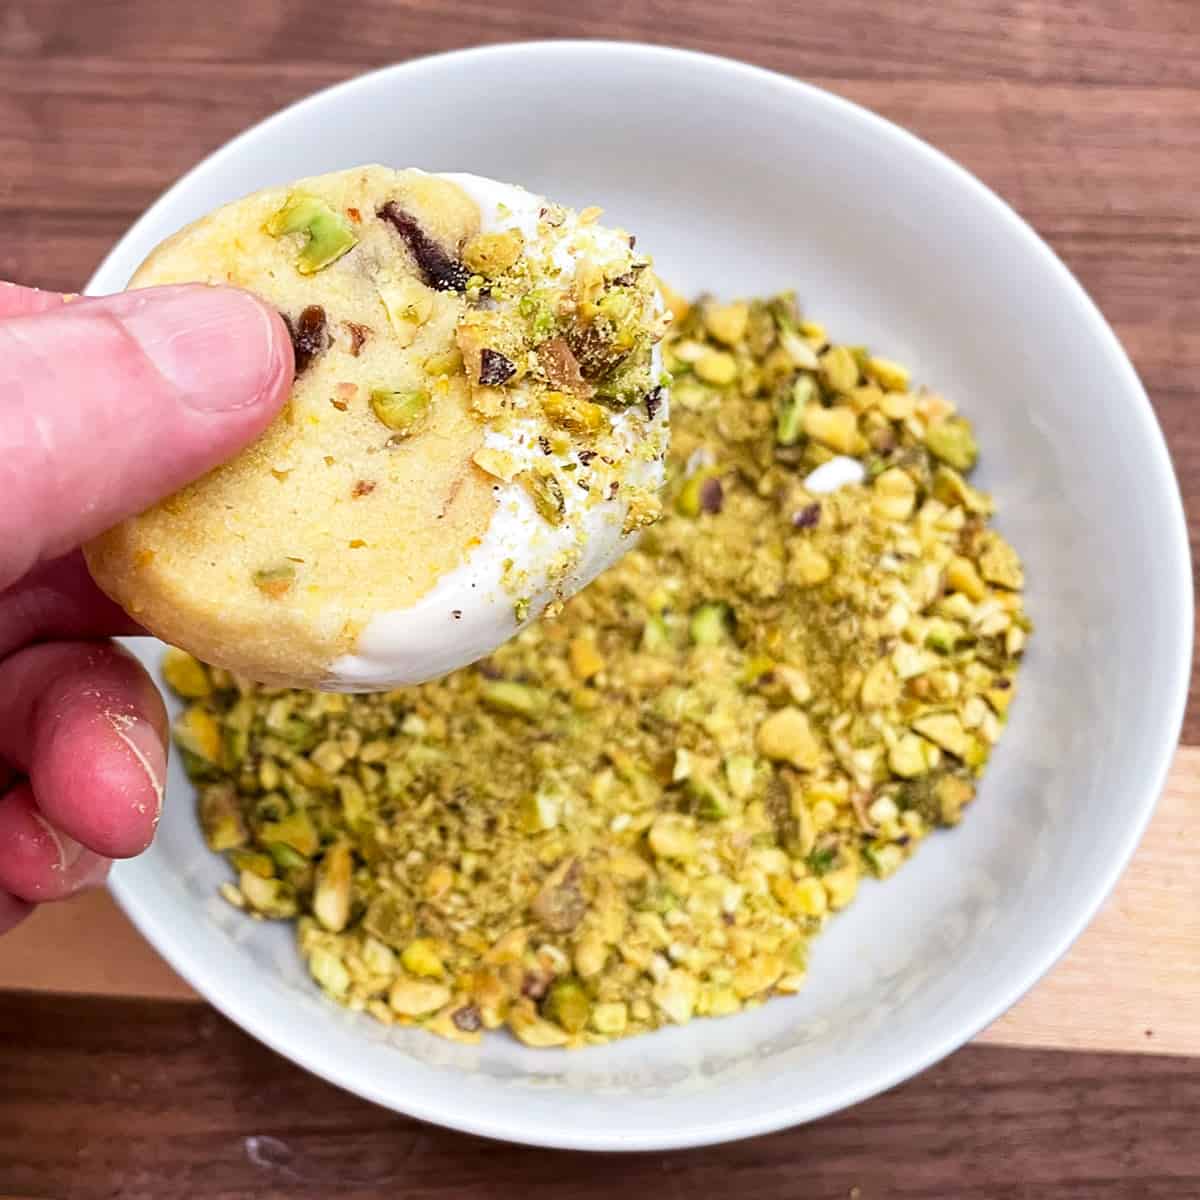 Adding small, chopped pistachios to the white chocolate that the cookie was dipped into.